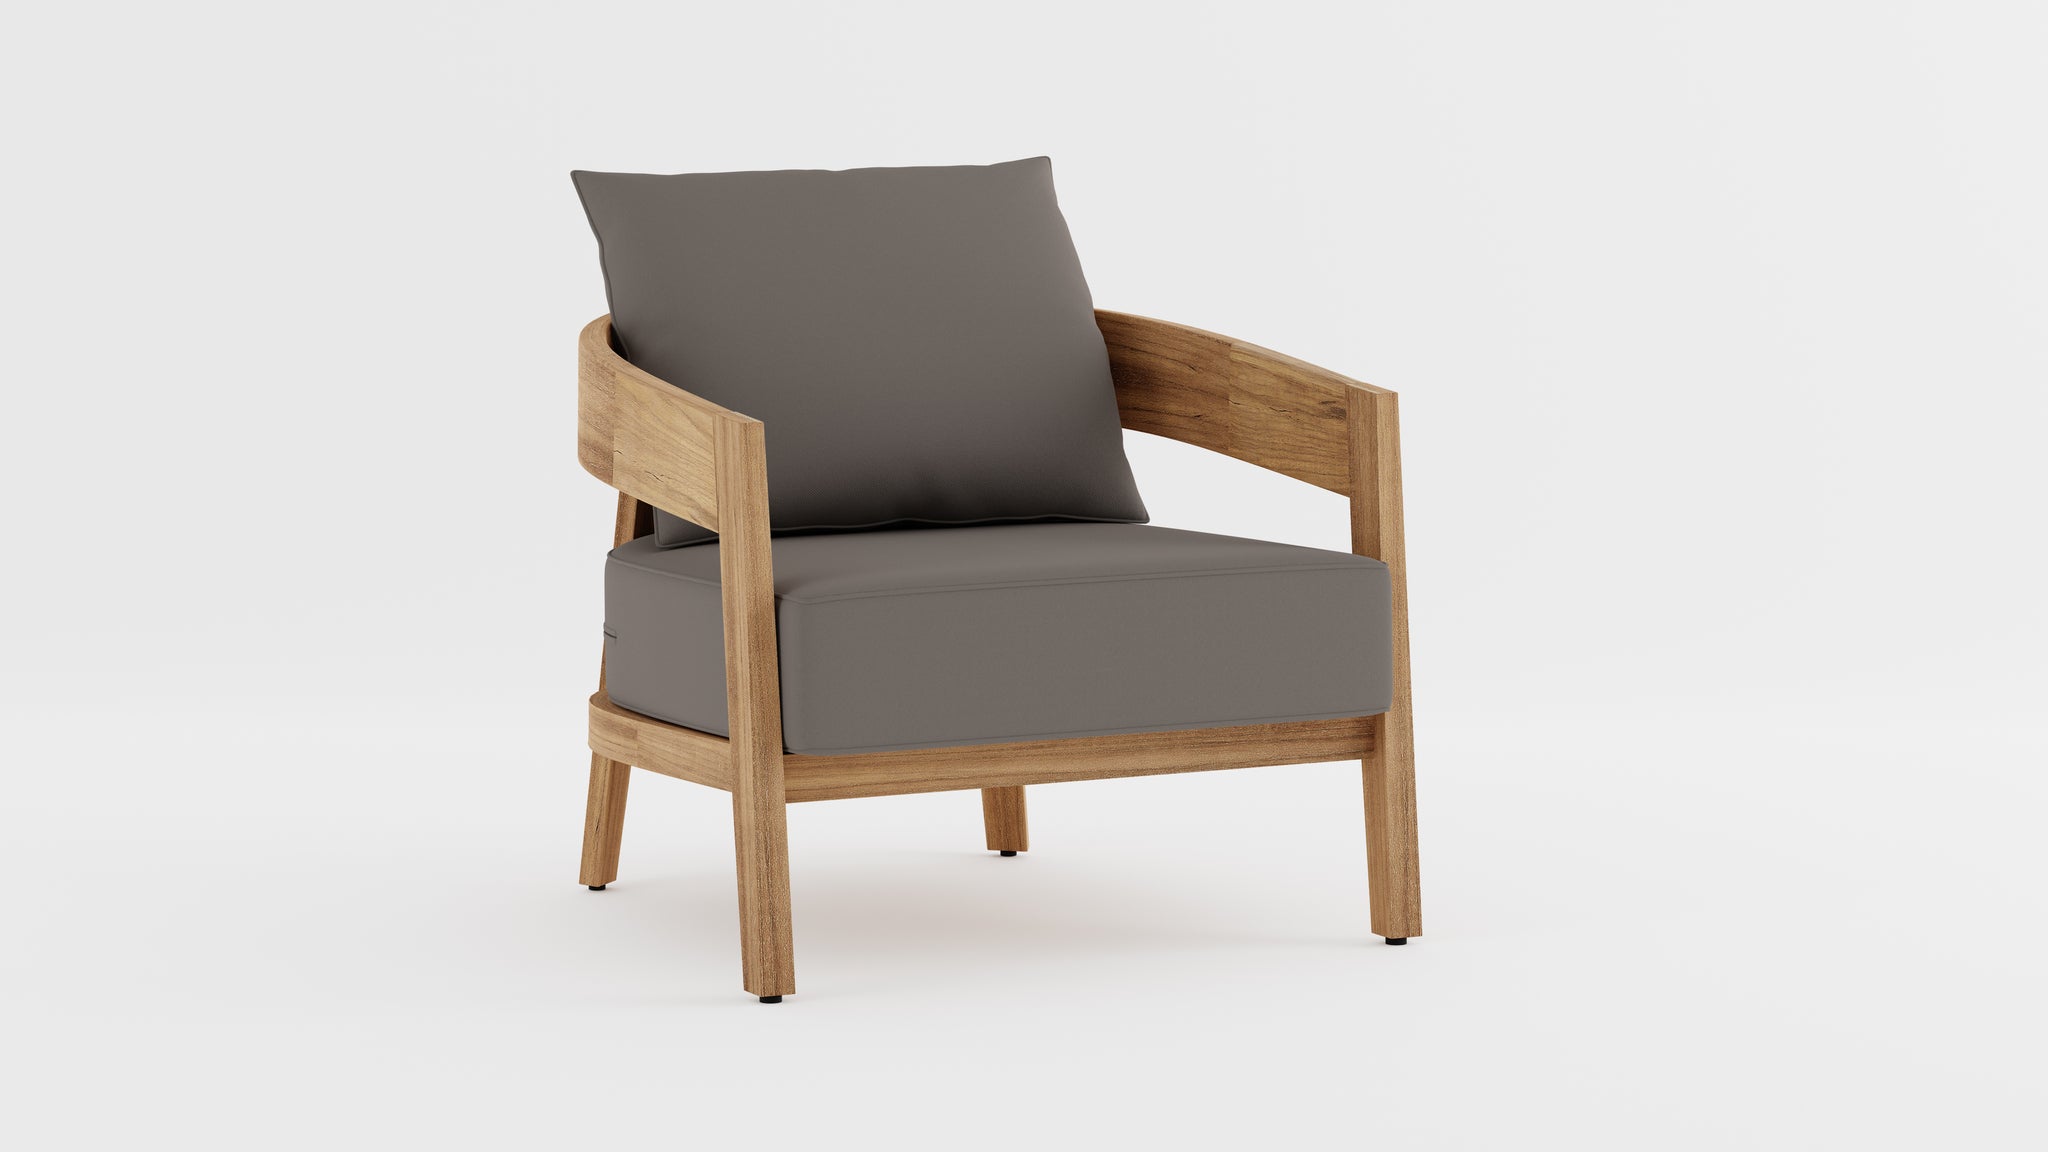 The Windsor Outdoor Teak Lounge Armchair with Light Grey Cushions